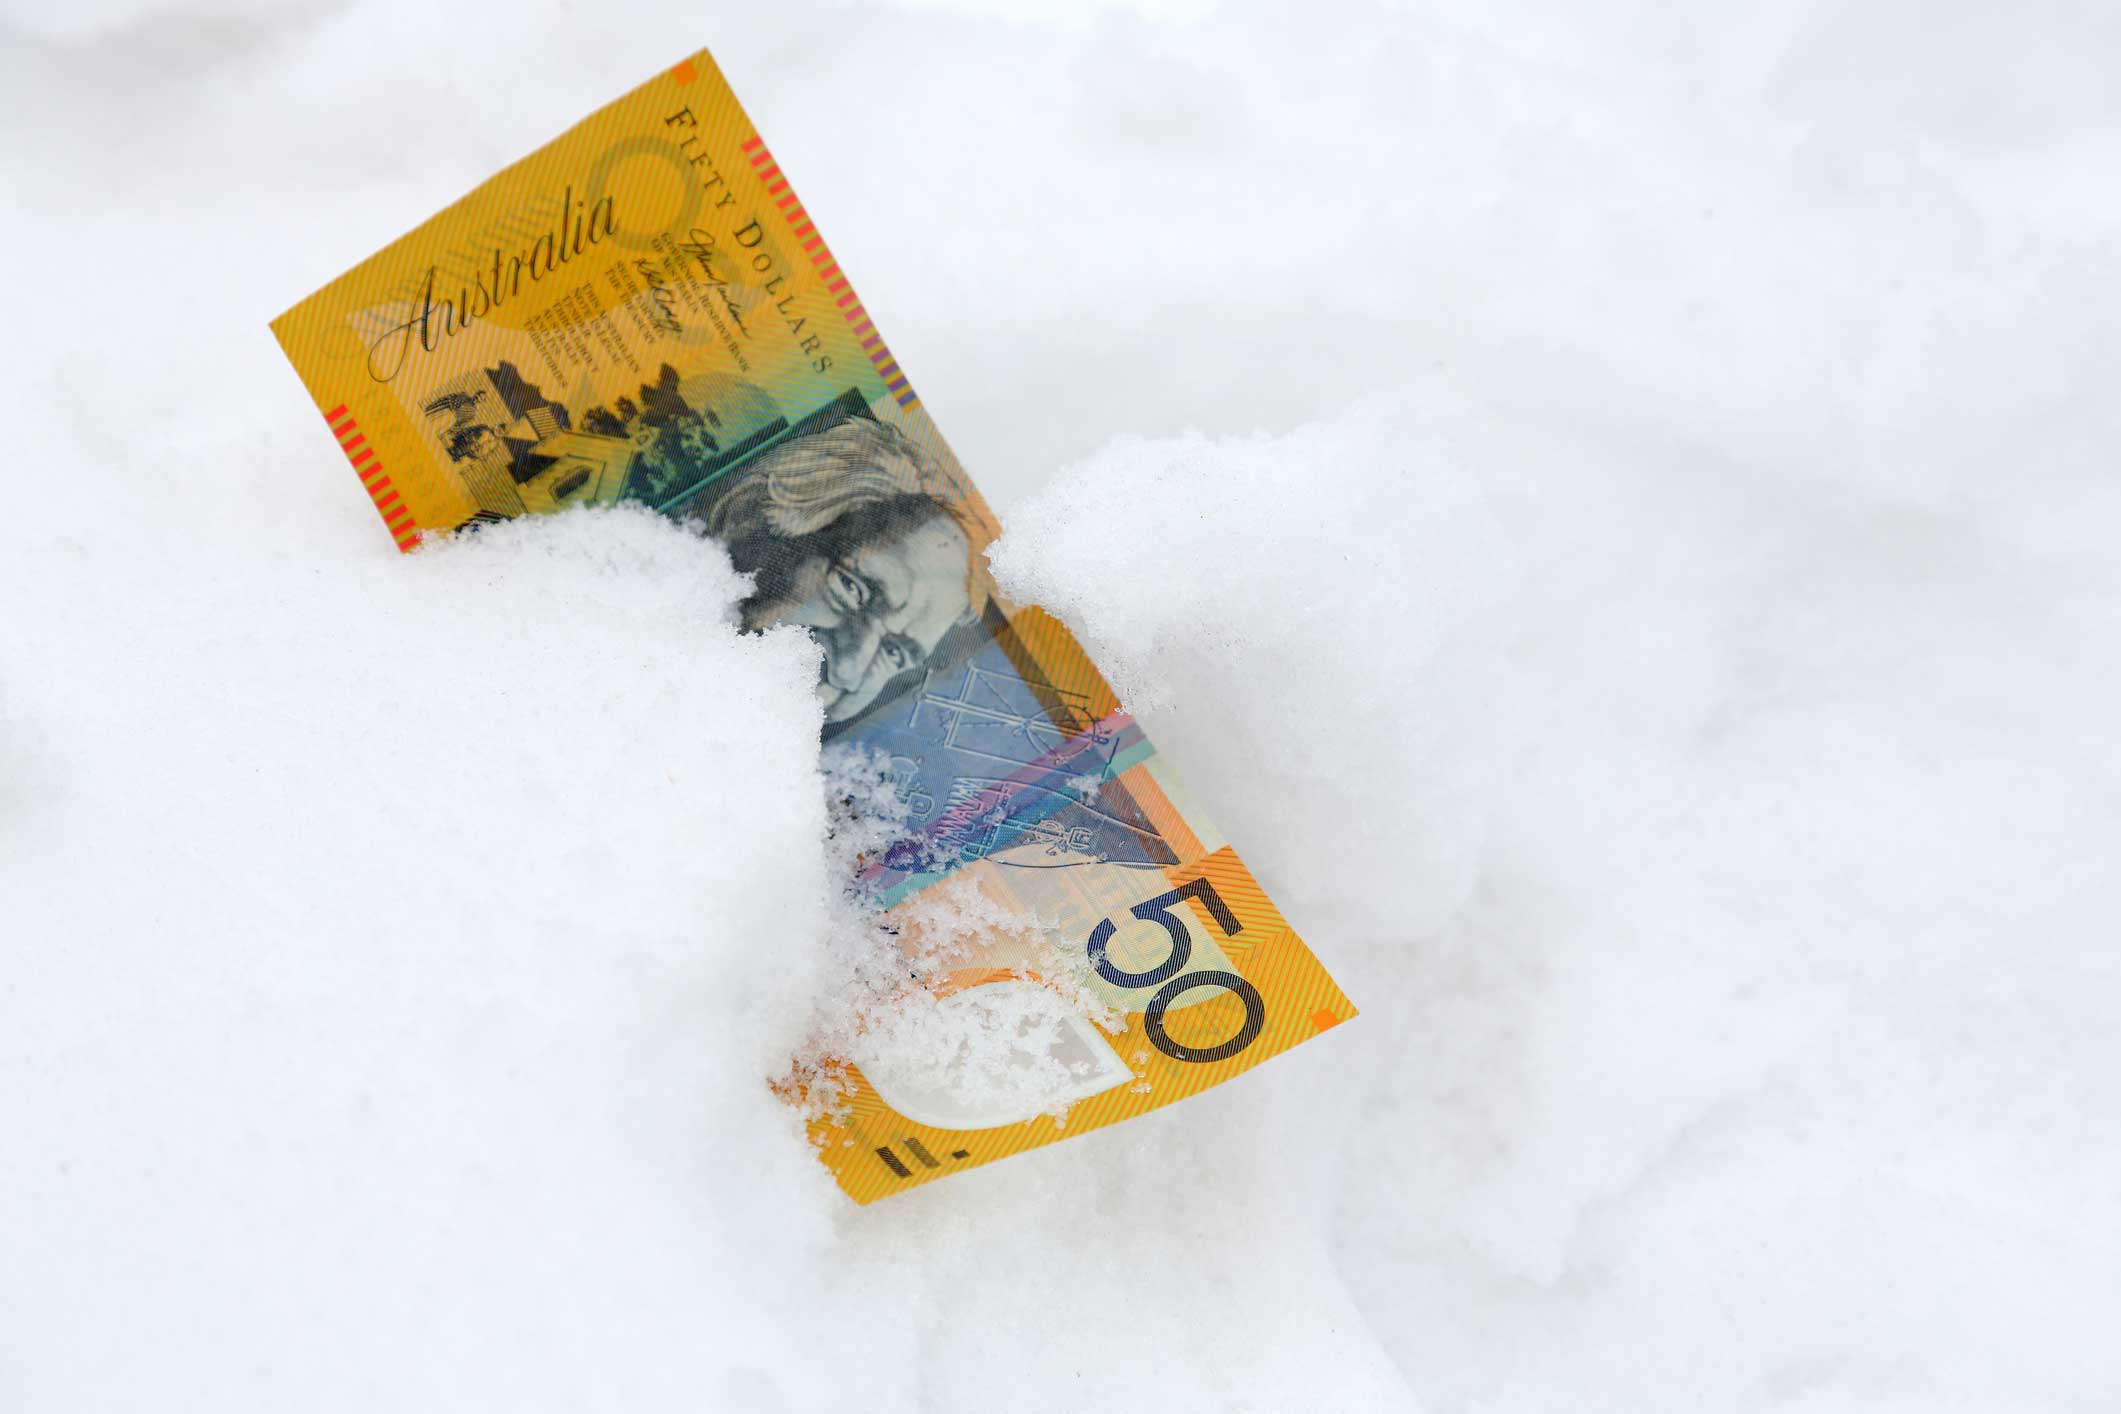 A fifty dollar note lying in snow